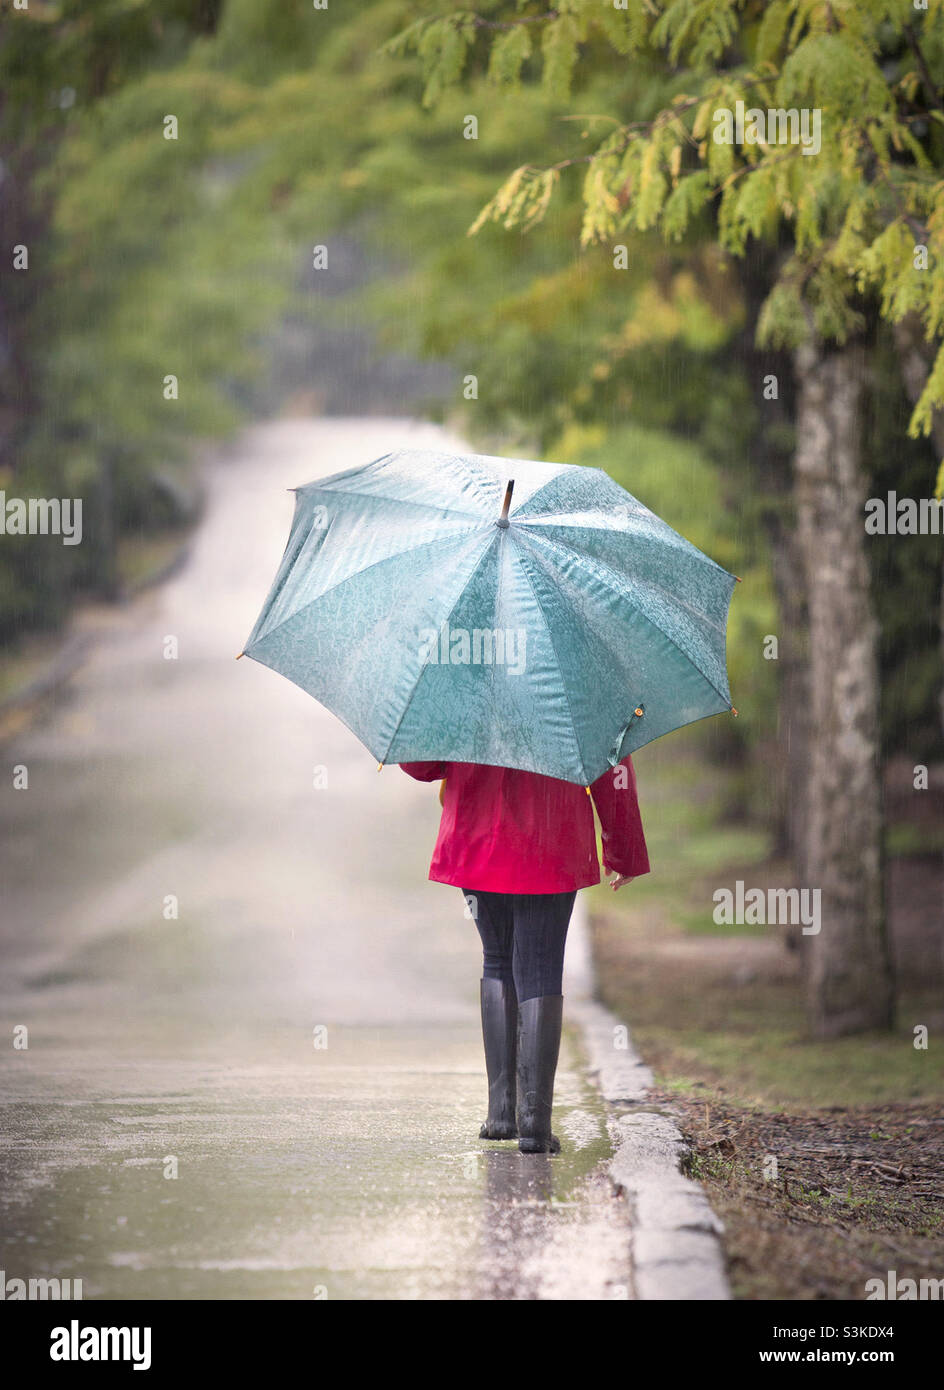 Girl with an umbrella in a fall rainy day Stock Photo